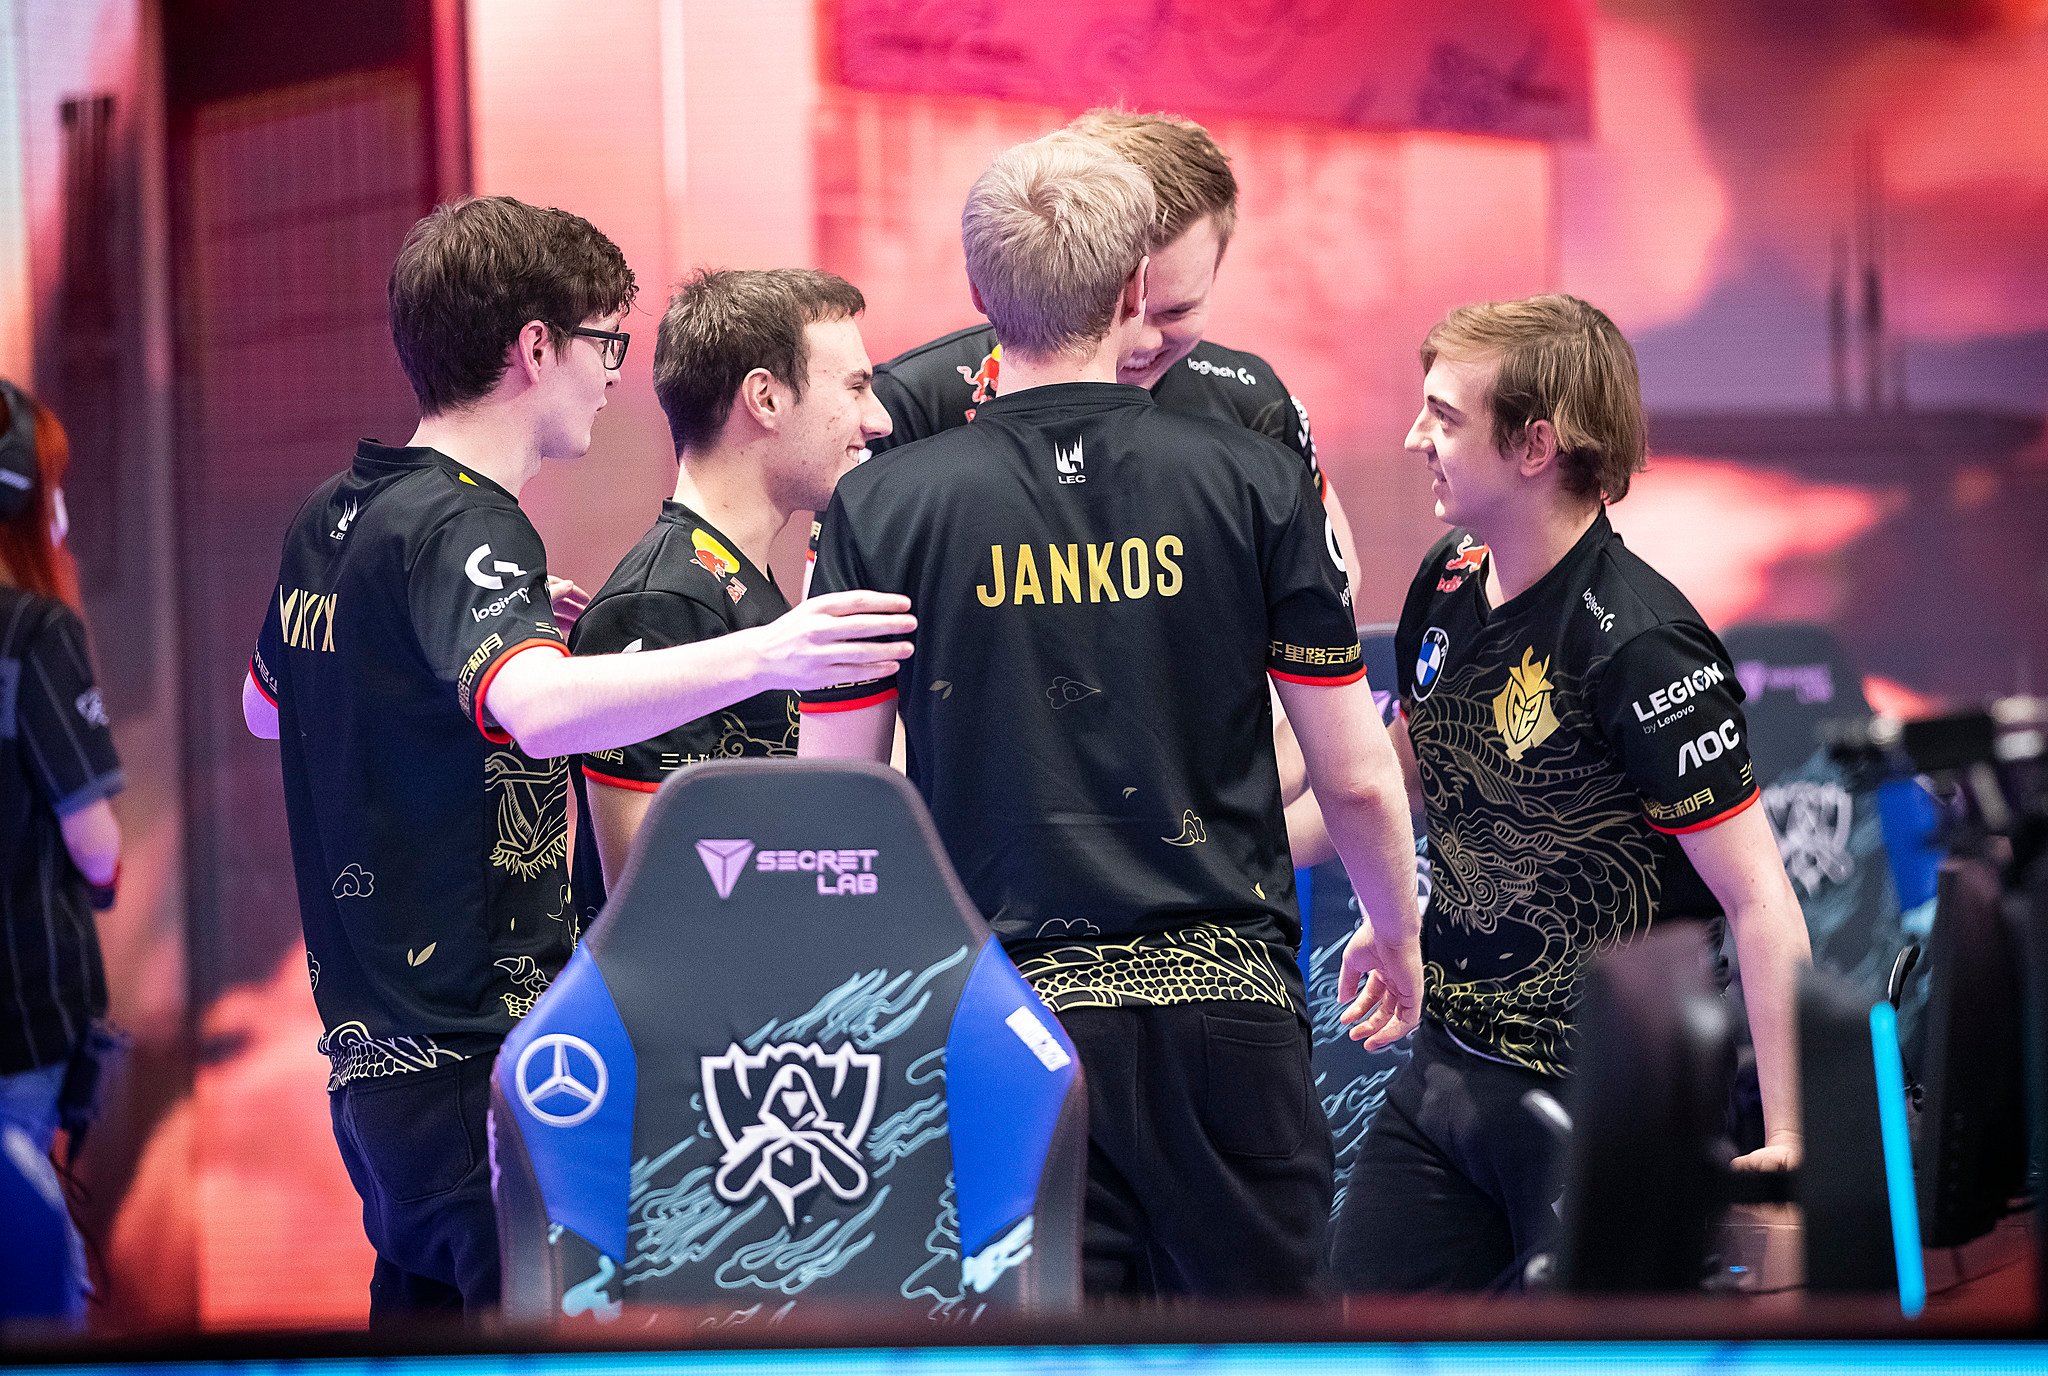 Worlds 2020 – G2 Esports’ Semifinals Match-up Against DAMWON Gaming Was One Of The Best Matches This Worlds